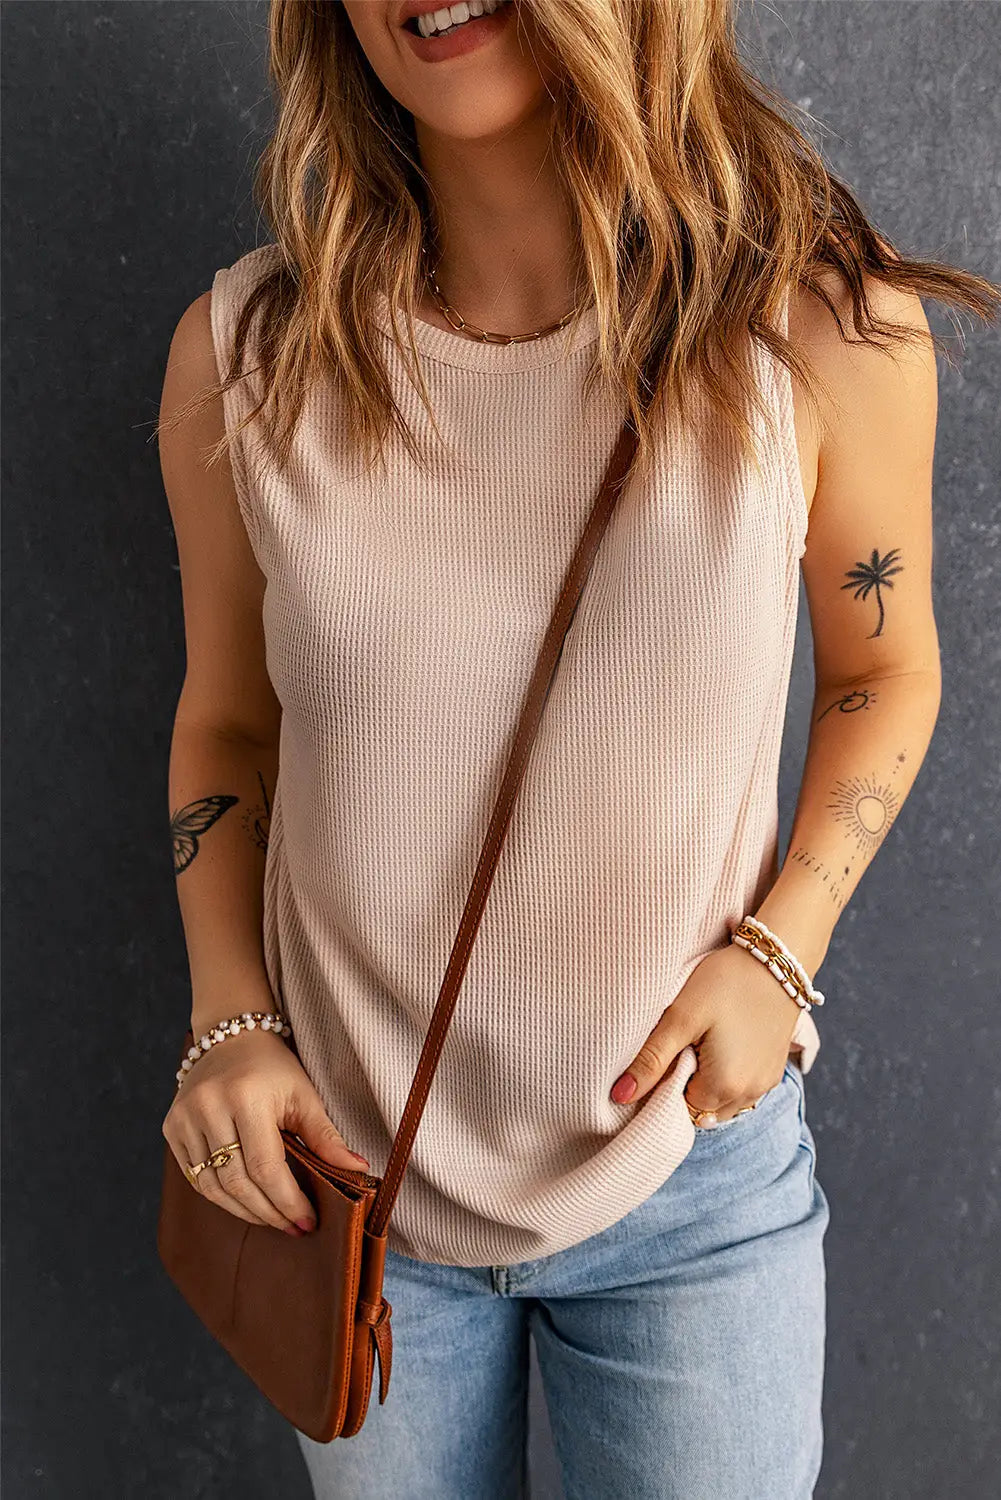 Apricot crew neck waffle tank top - s /